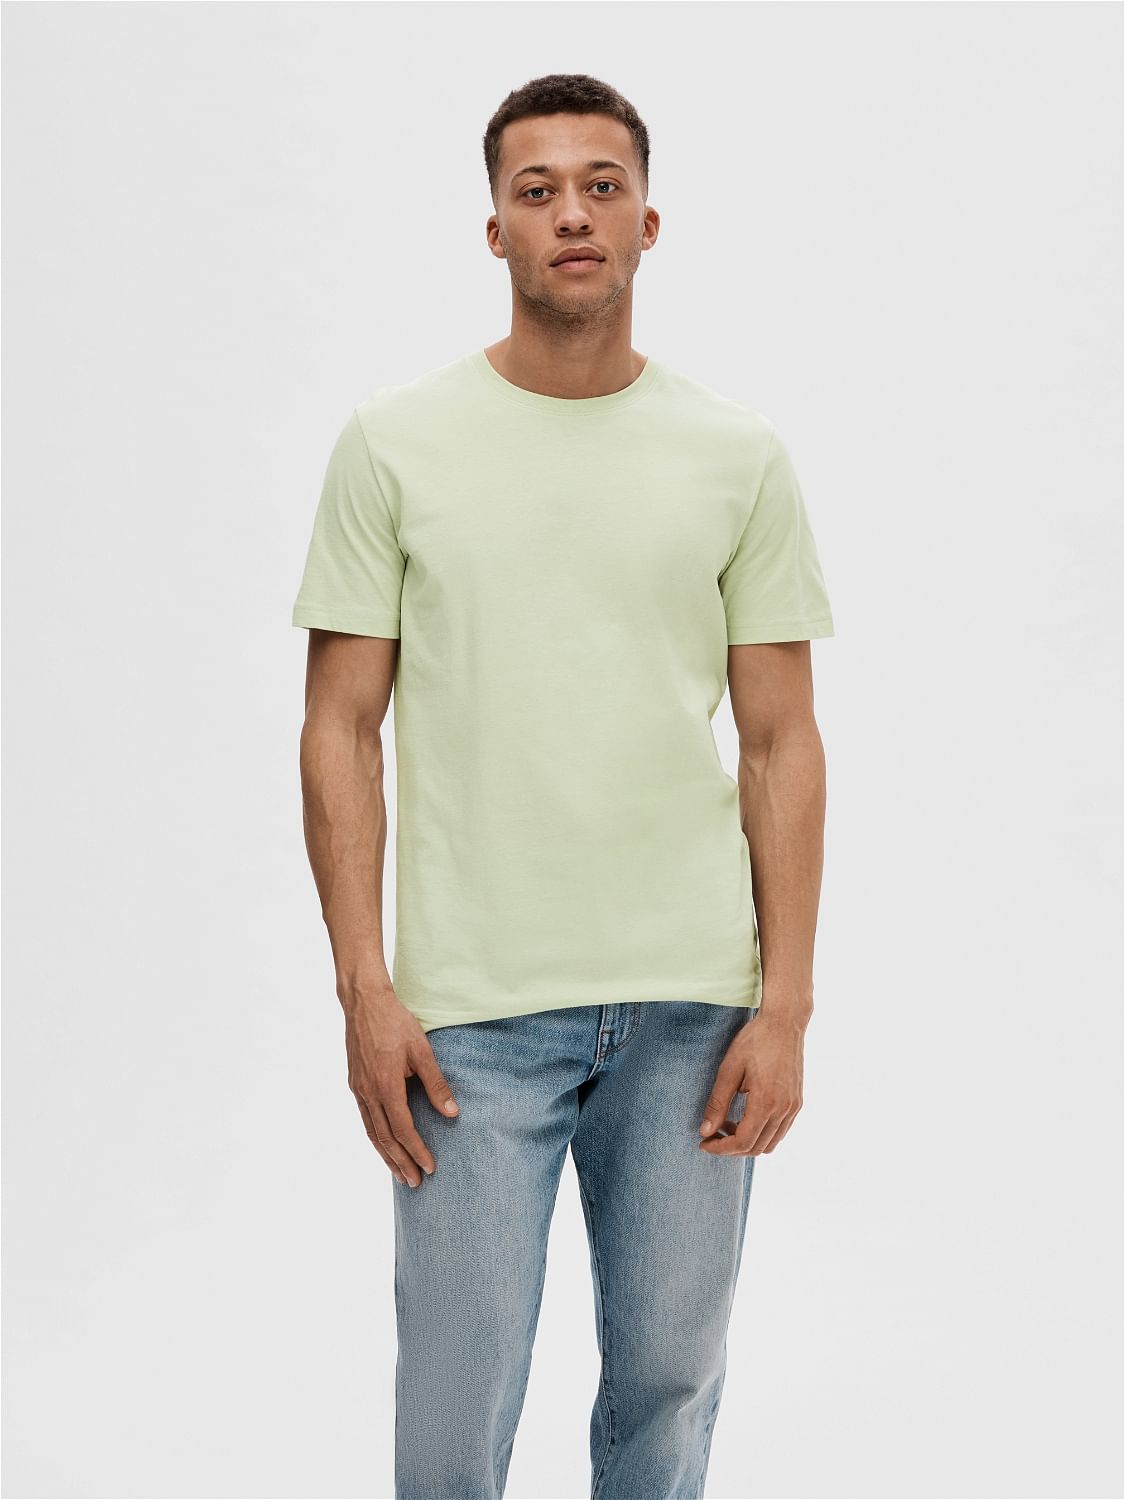 Buy LIFE Mens Round Neck Printed T-Shirt | Shoppers Stop